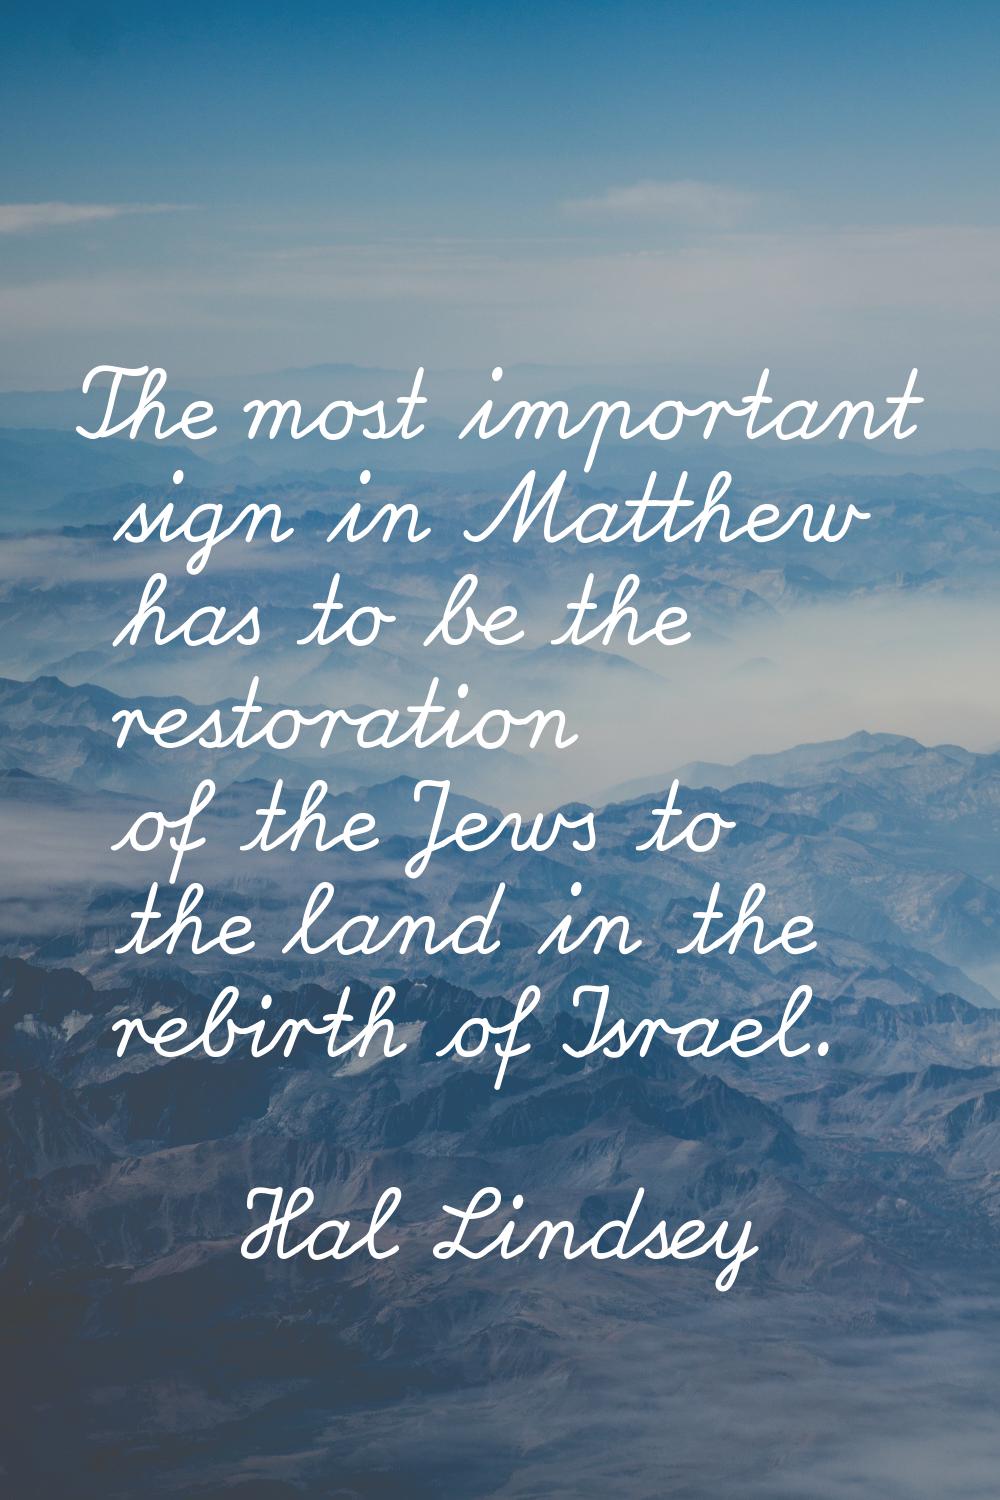 The most important sign in Matthew has to be the restoration of the Jews to the land in the rebirth